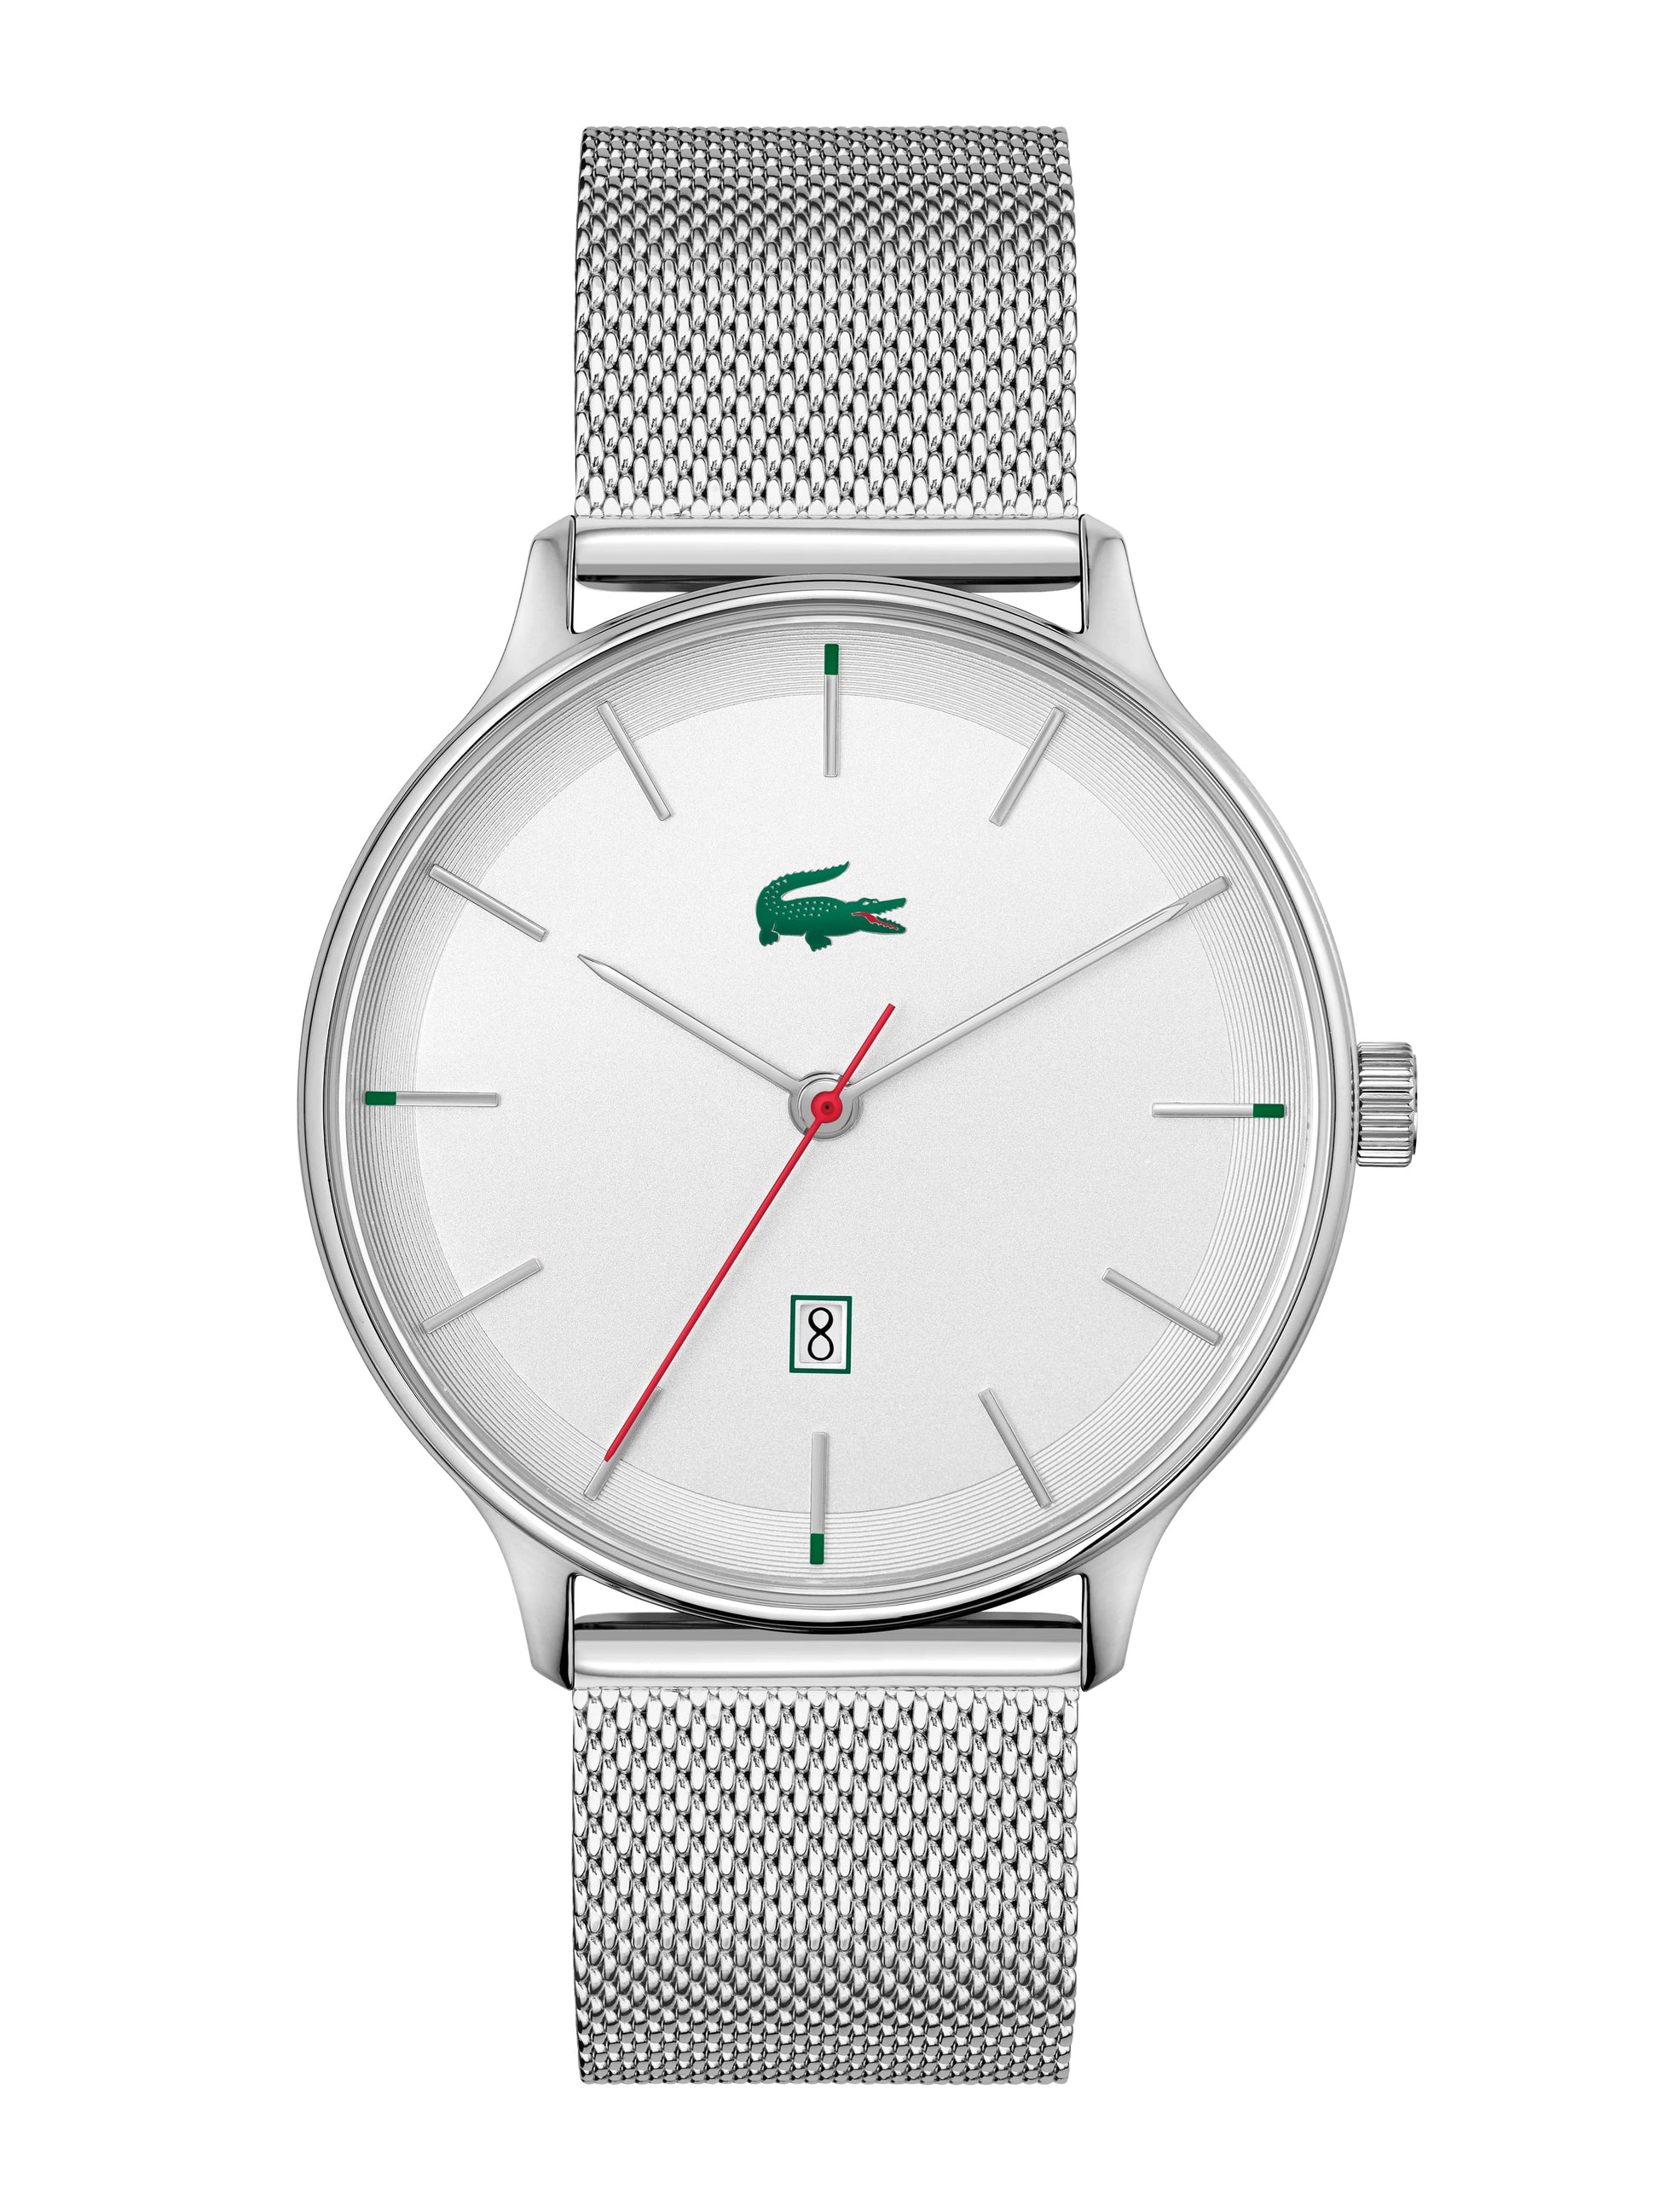 Lacoste Men's Club Silver Watch 2011201 with leather strap.